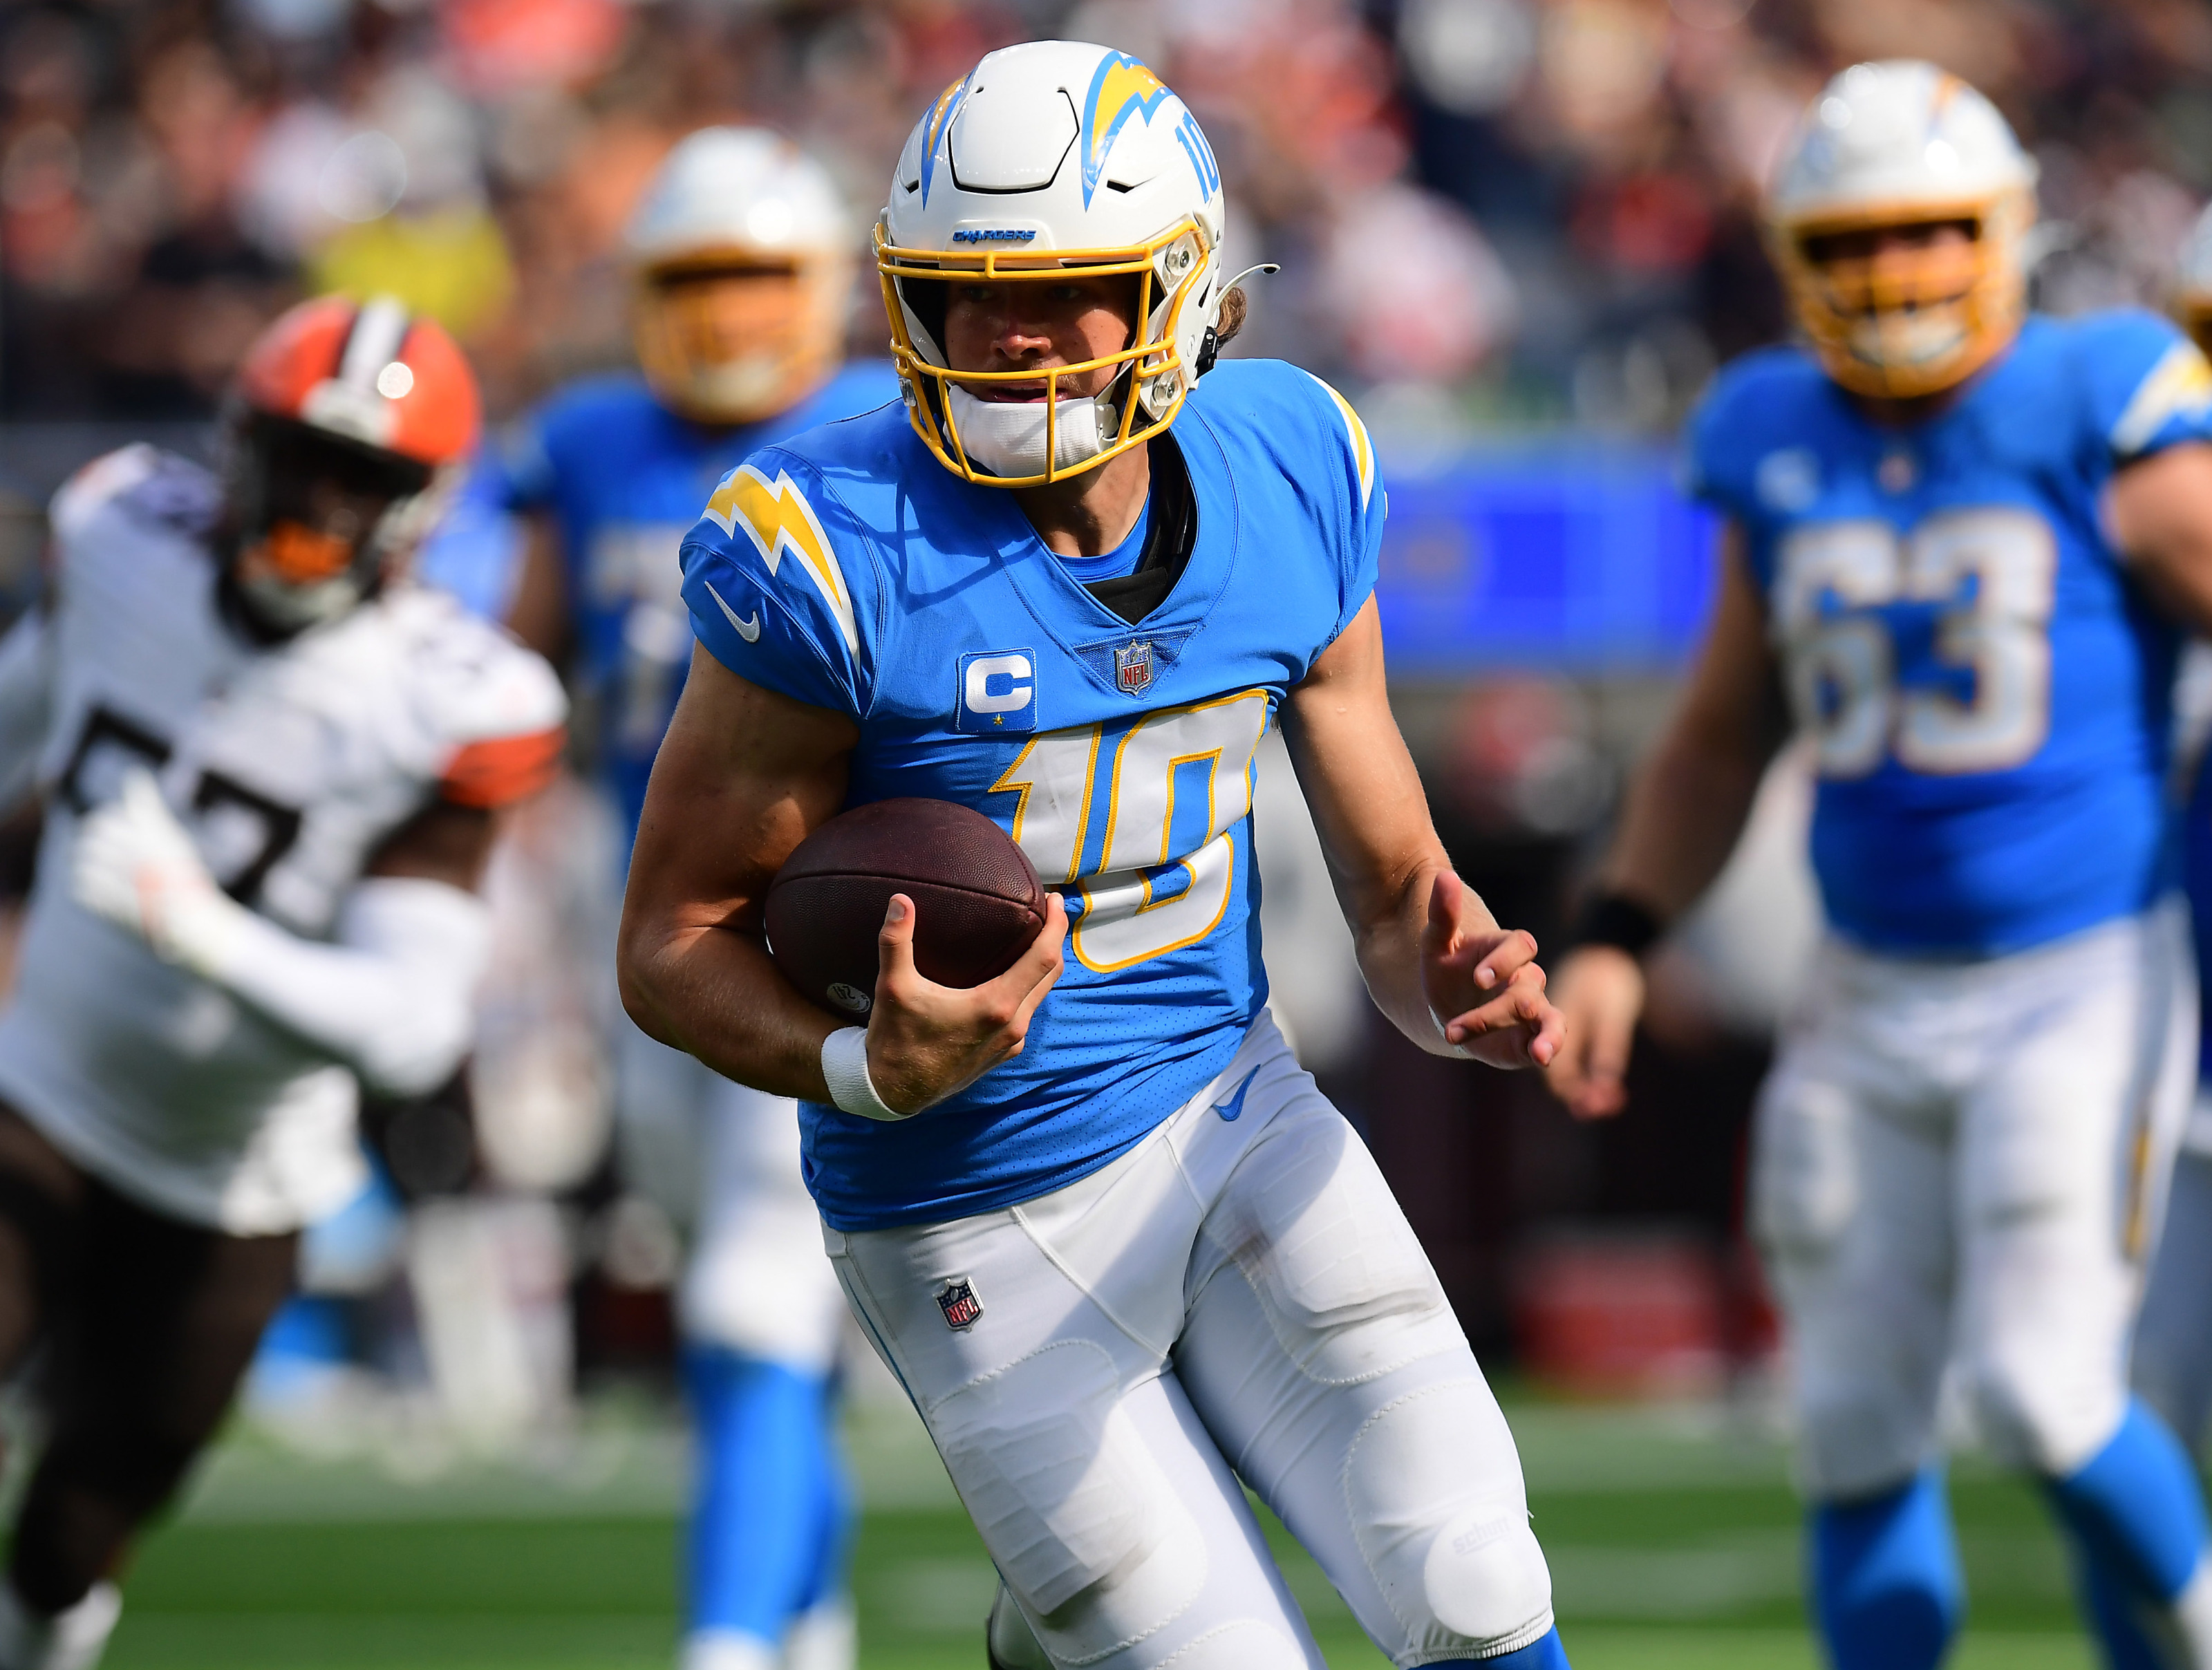 2021 NFL picks against the spread, Week 6: Chargers tempting underdog